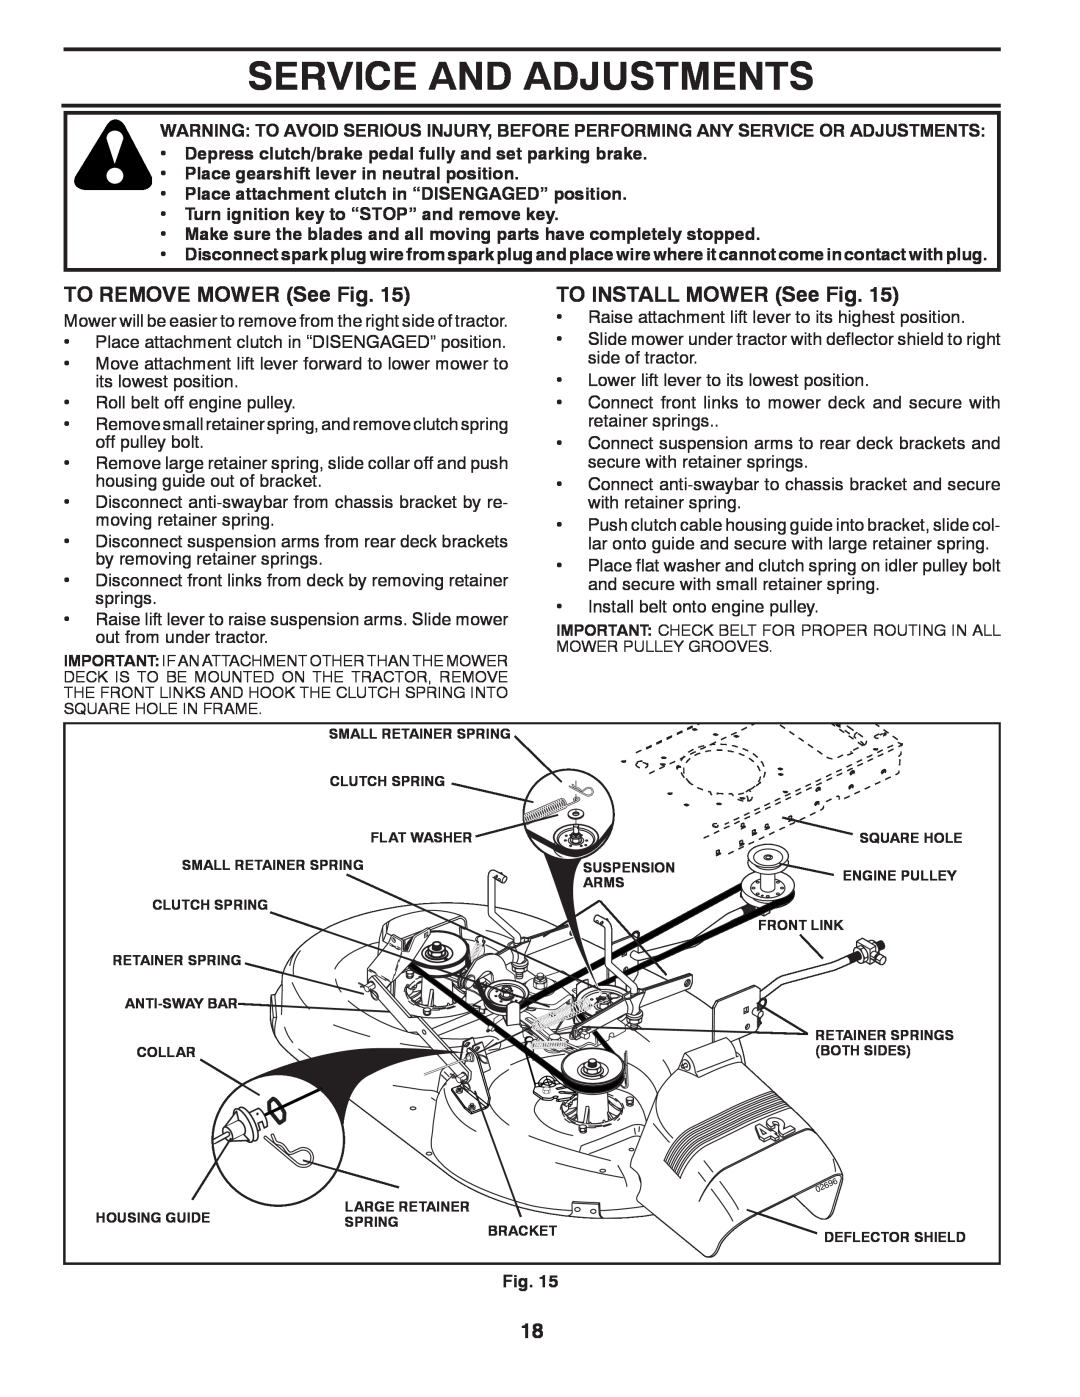 Poulan 438719, 96012011000 manual Service And Adjustments, TO REMOVE MOWER See Fig, TO INSTALL MOWER See Fig 